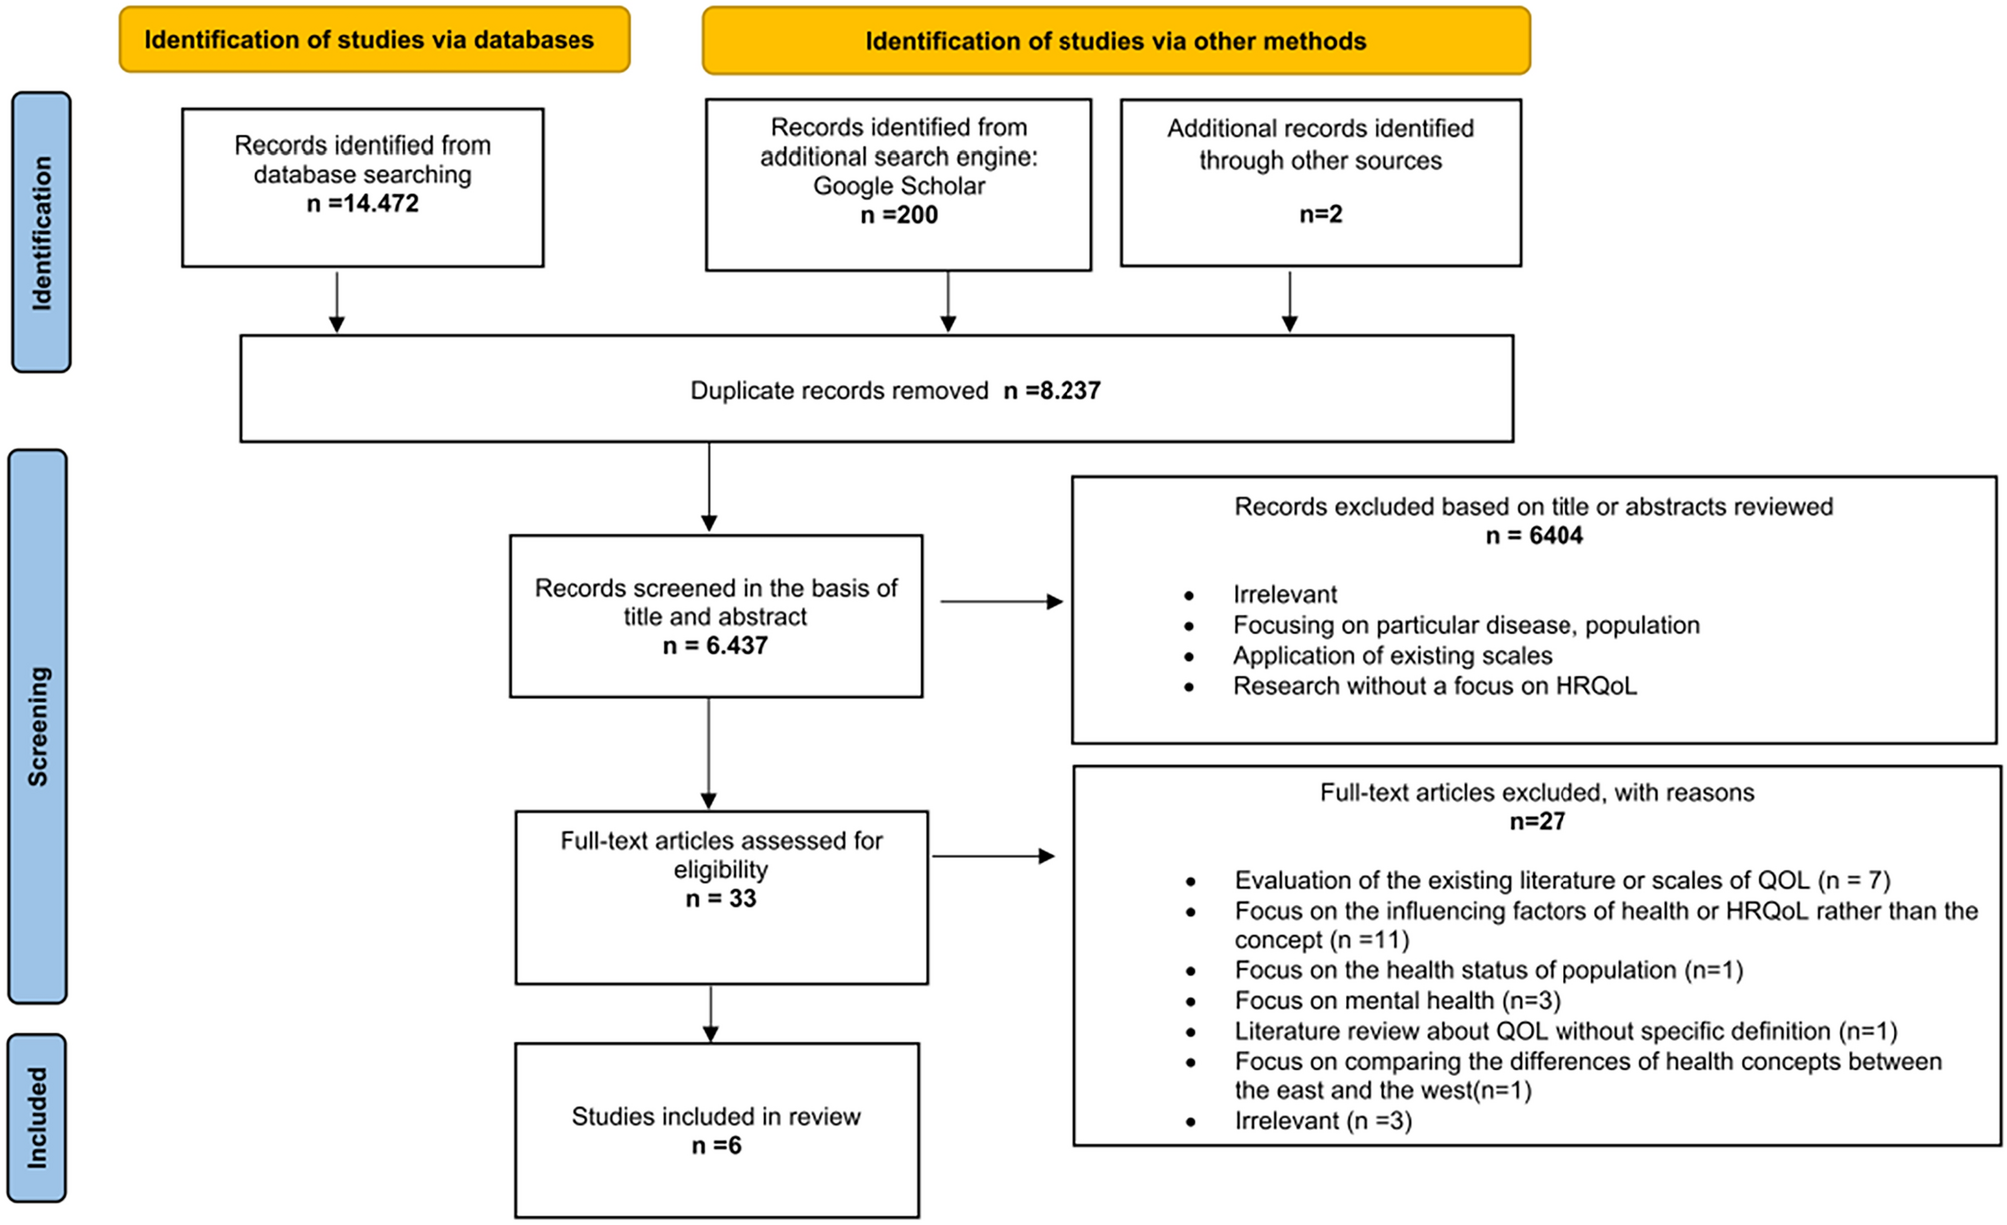 Differences and common ground in the frameworks of health-related quality of life in traditional Chinese medicine and modern medicine: a systematic review